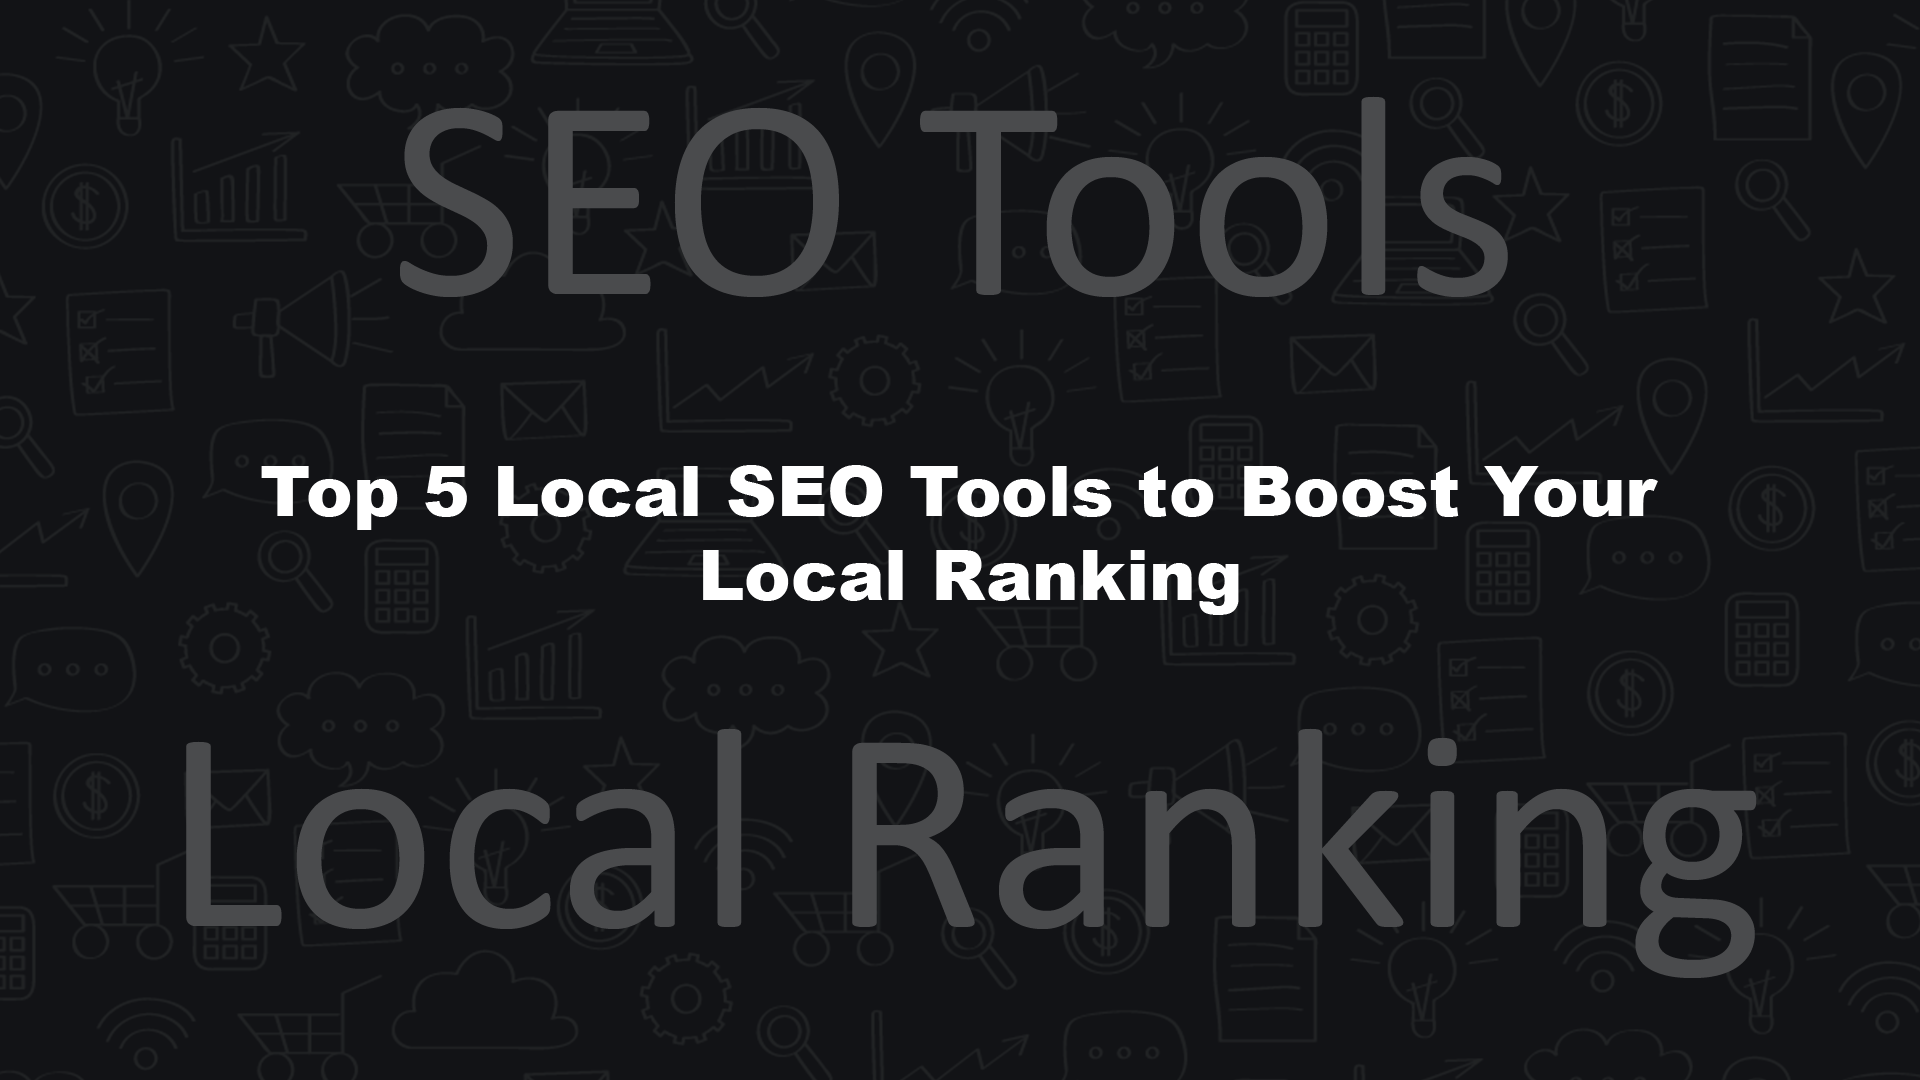 Top 5 Local SEO Tools to Boost Your Local Ranking